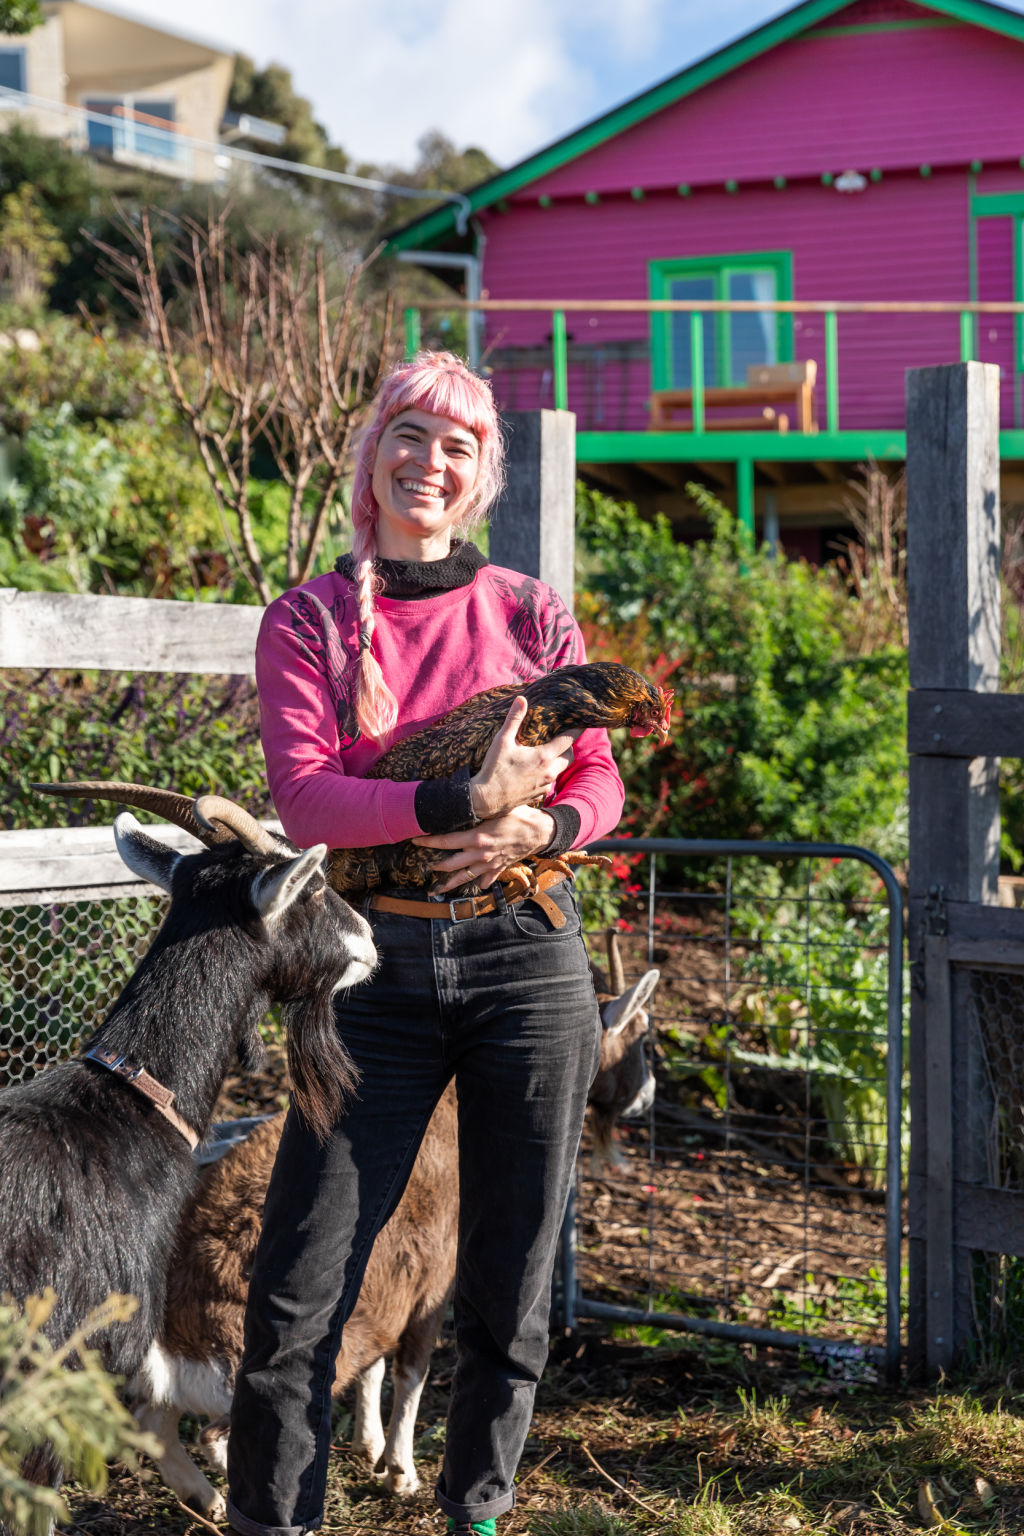 Hannah tends to the resident chickens and goats on the 3000-square-metre South Hobart property. Photo: NATASHA MULHALL